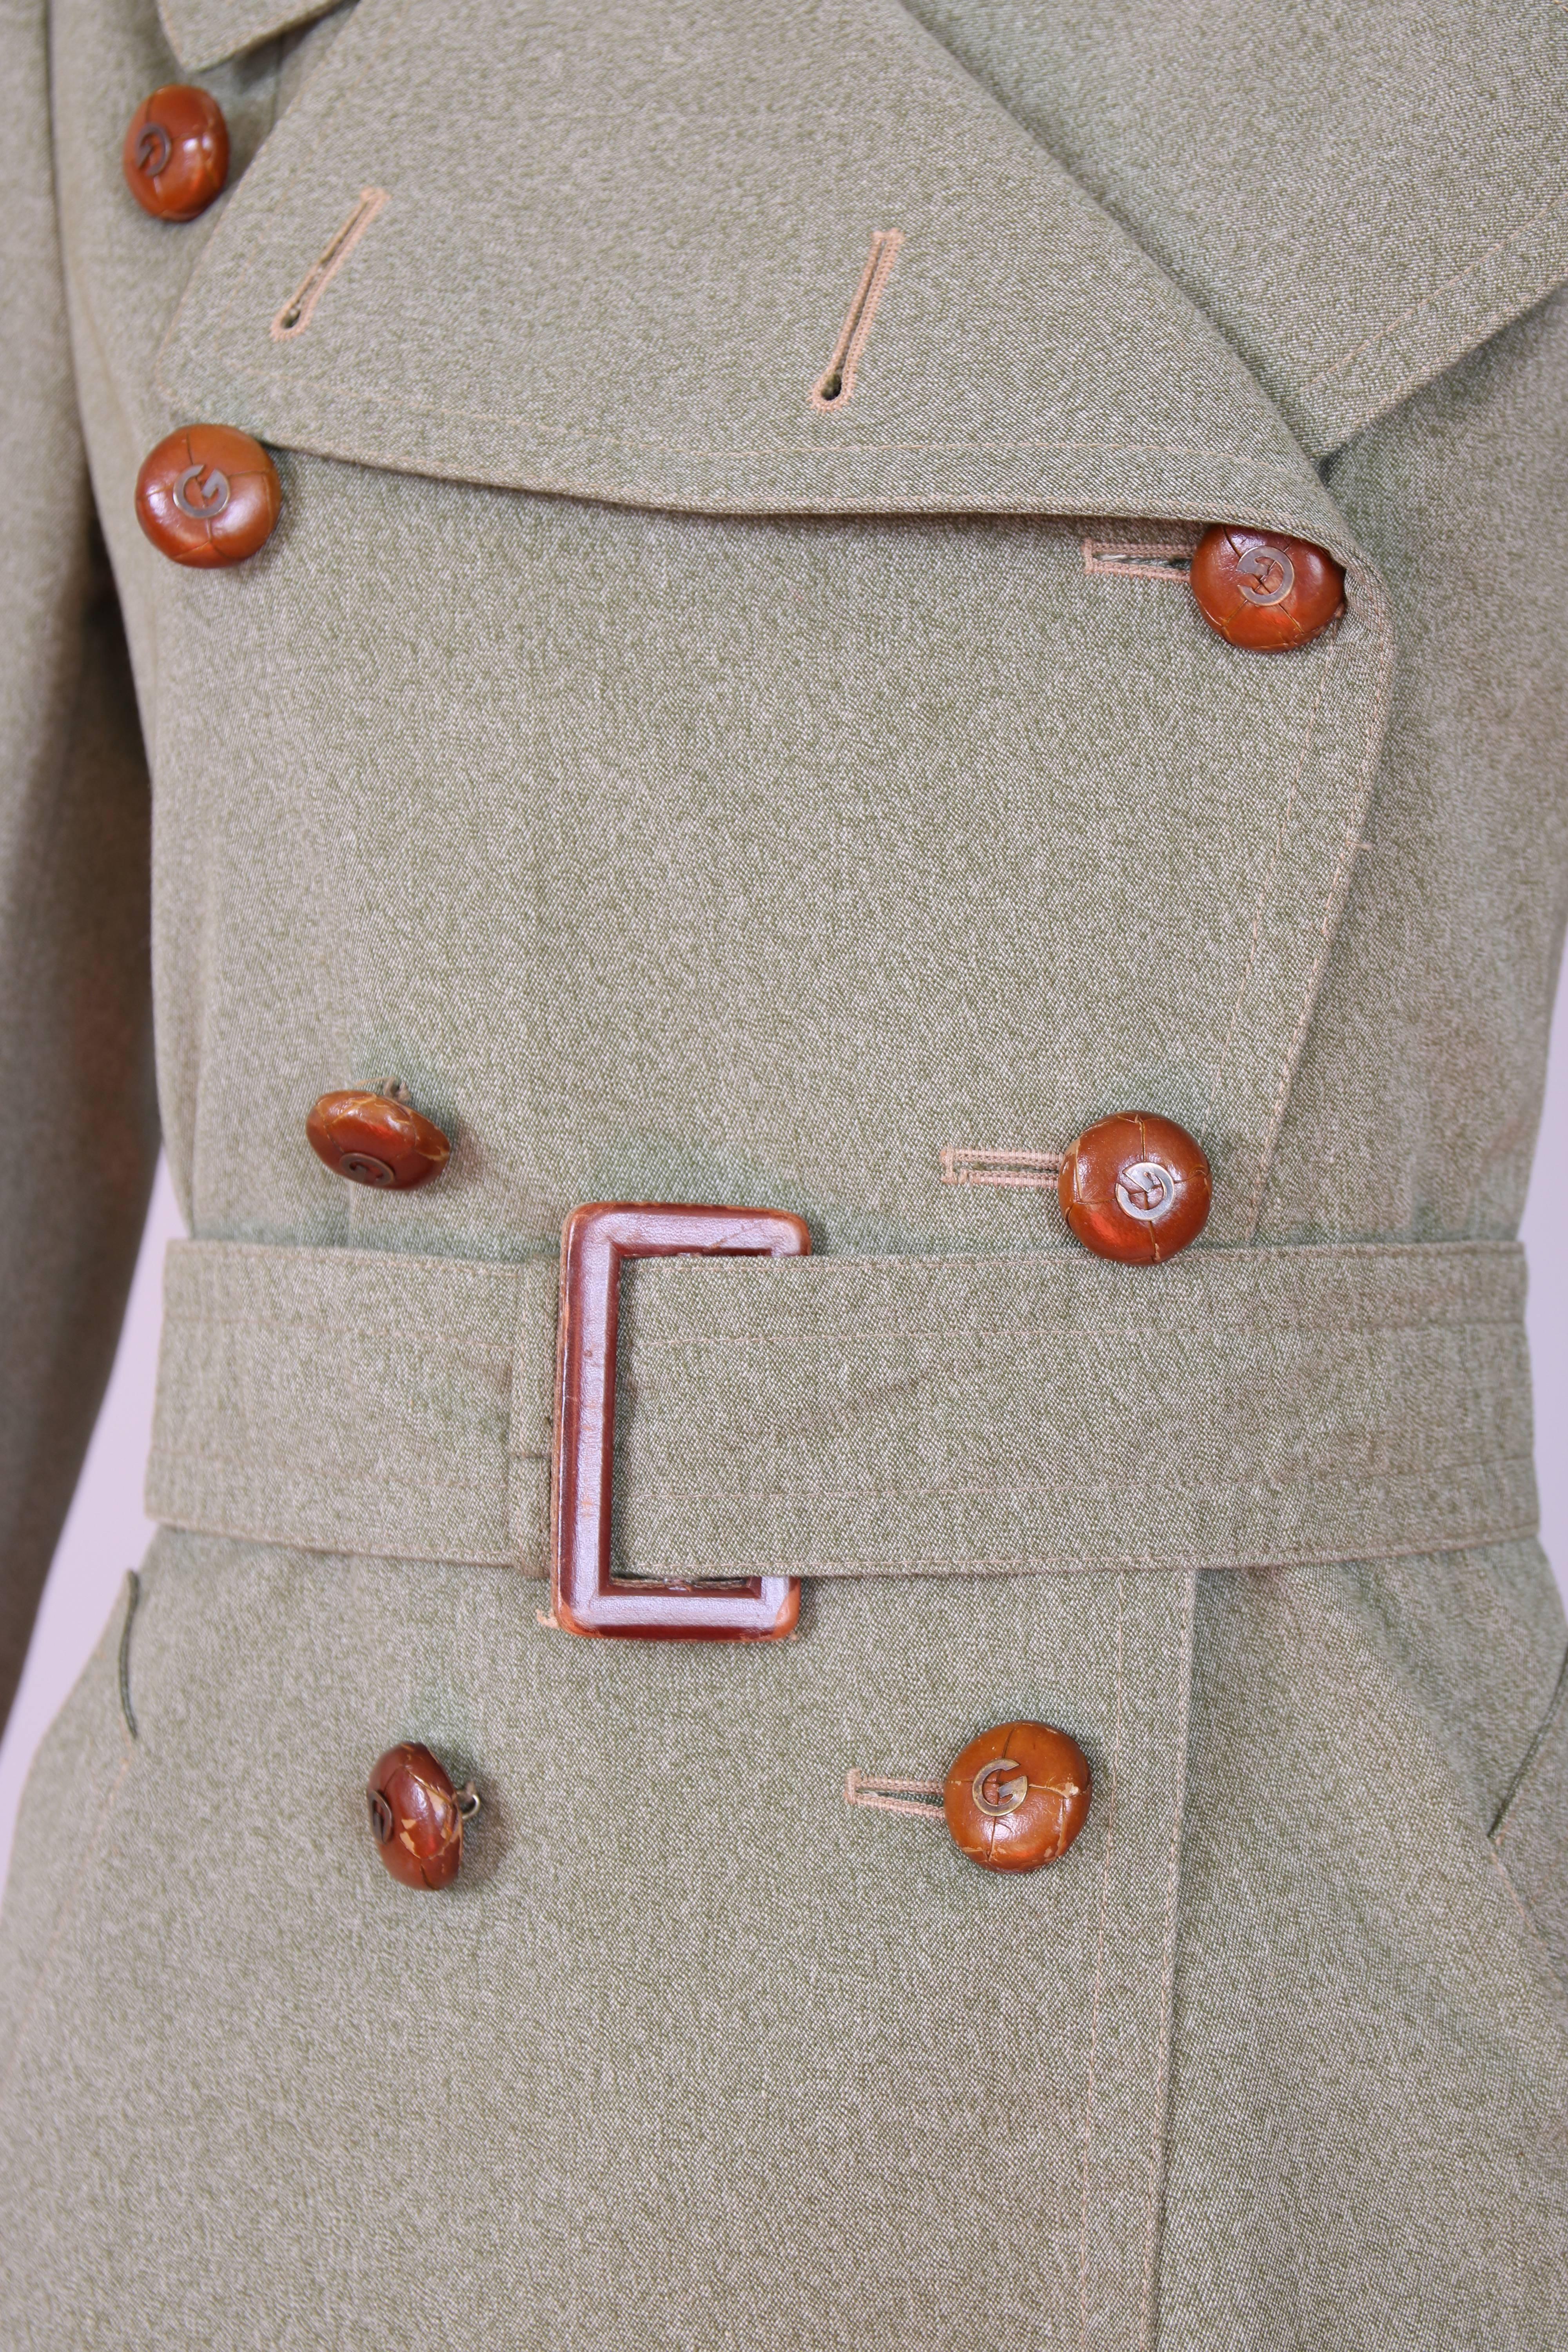 Women's 1970's Gucci Green Coat W/Leather Gucci Logo Buttons And Printed Silk Lining